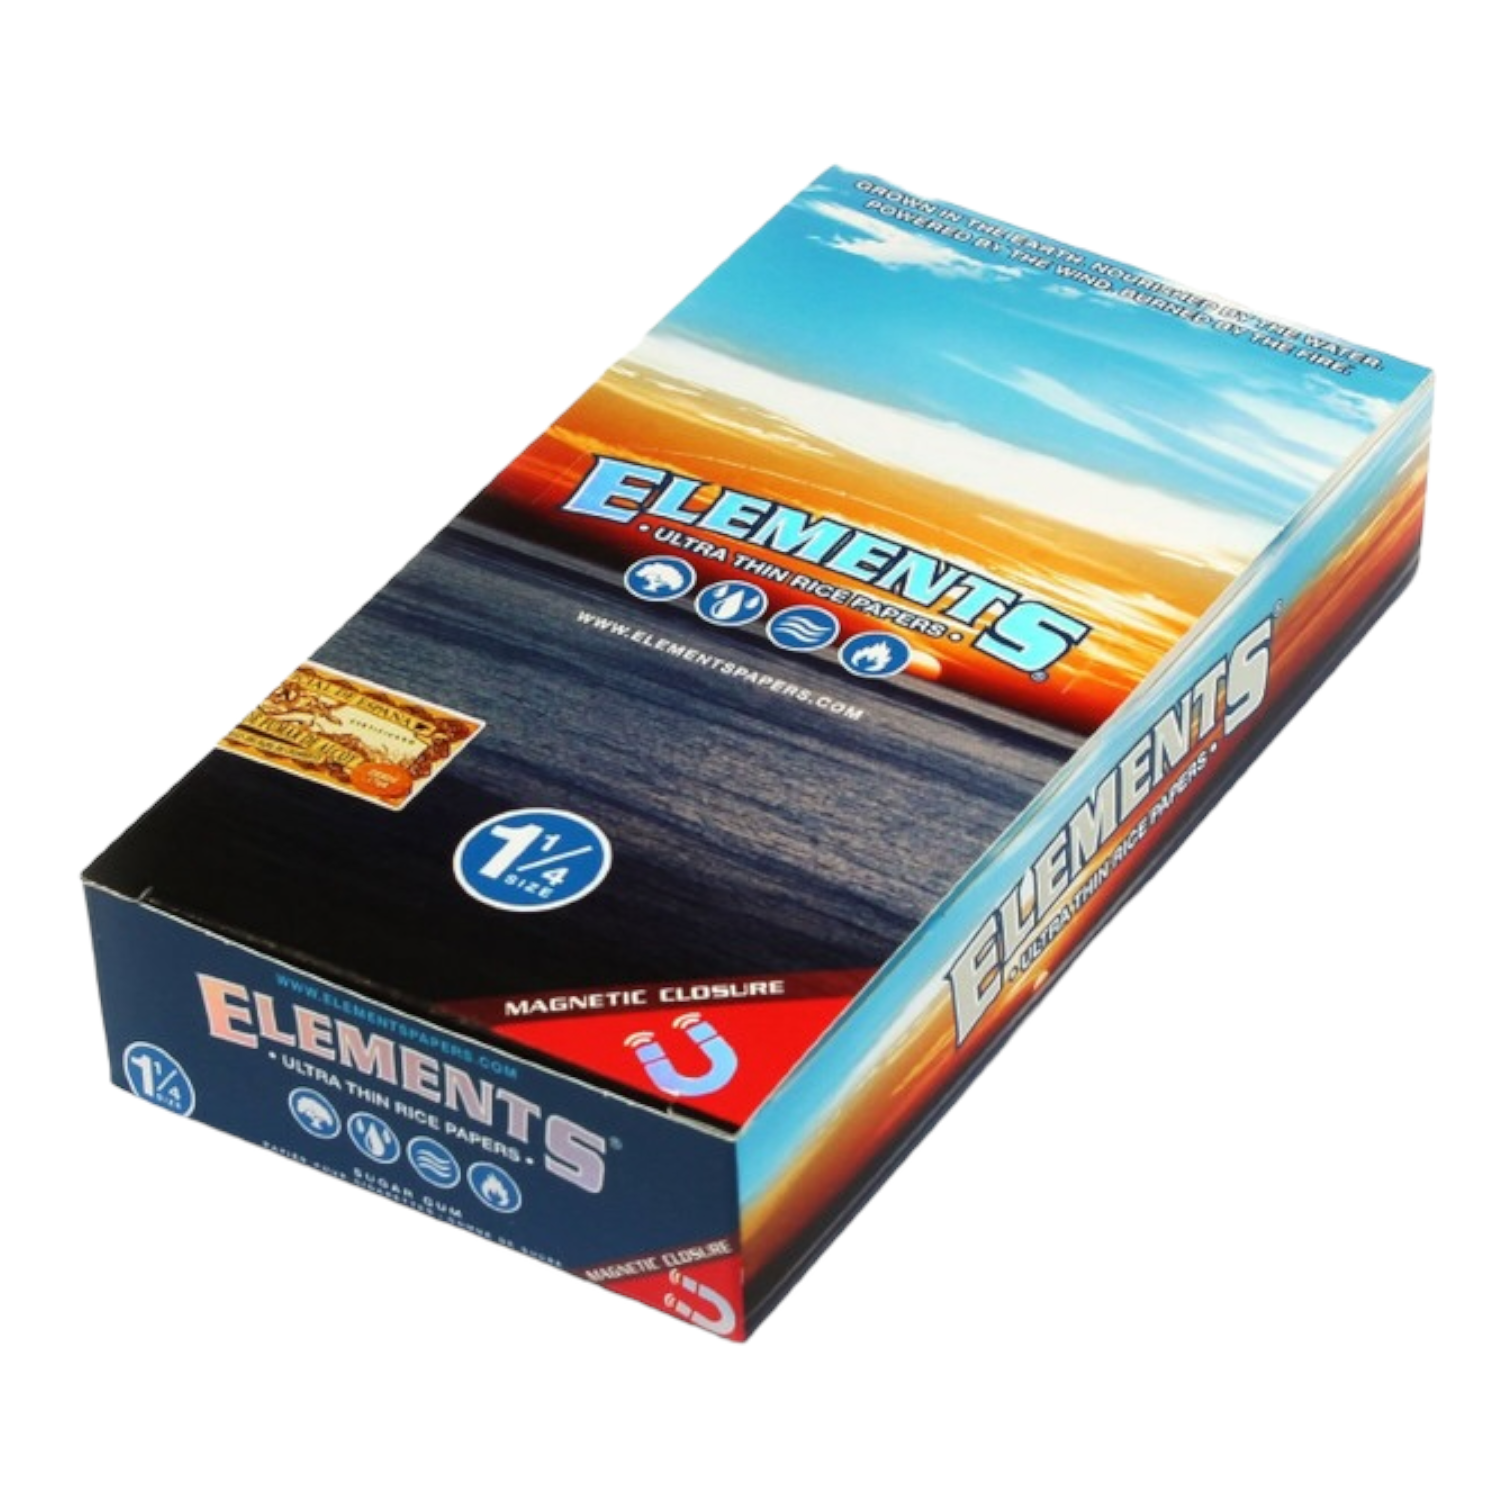 Elements - BOX Of Rice 1.25 Papers